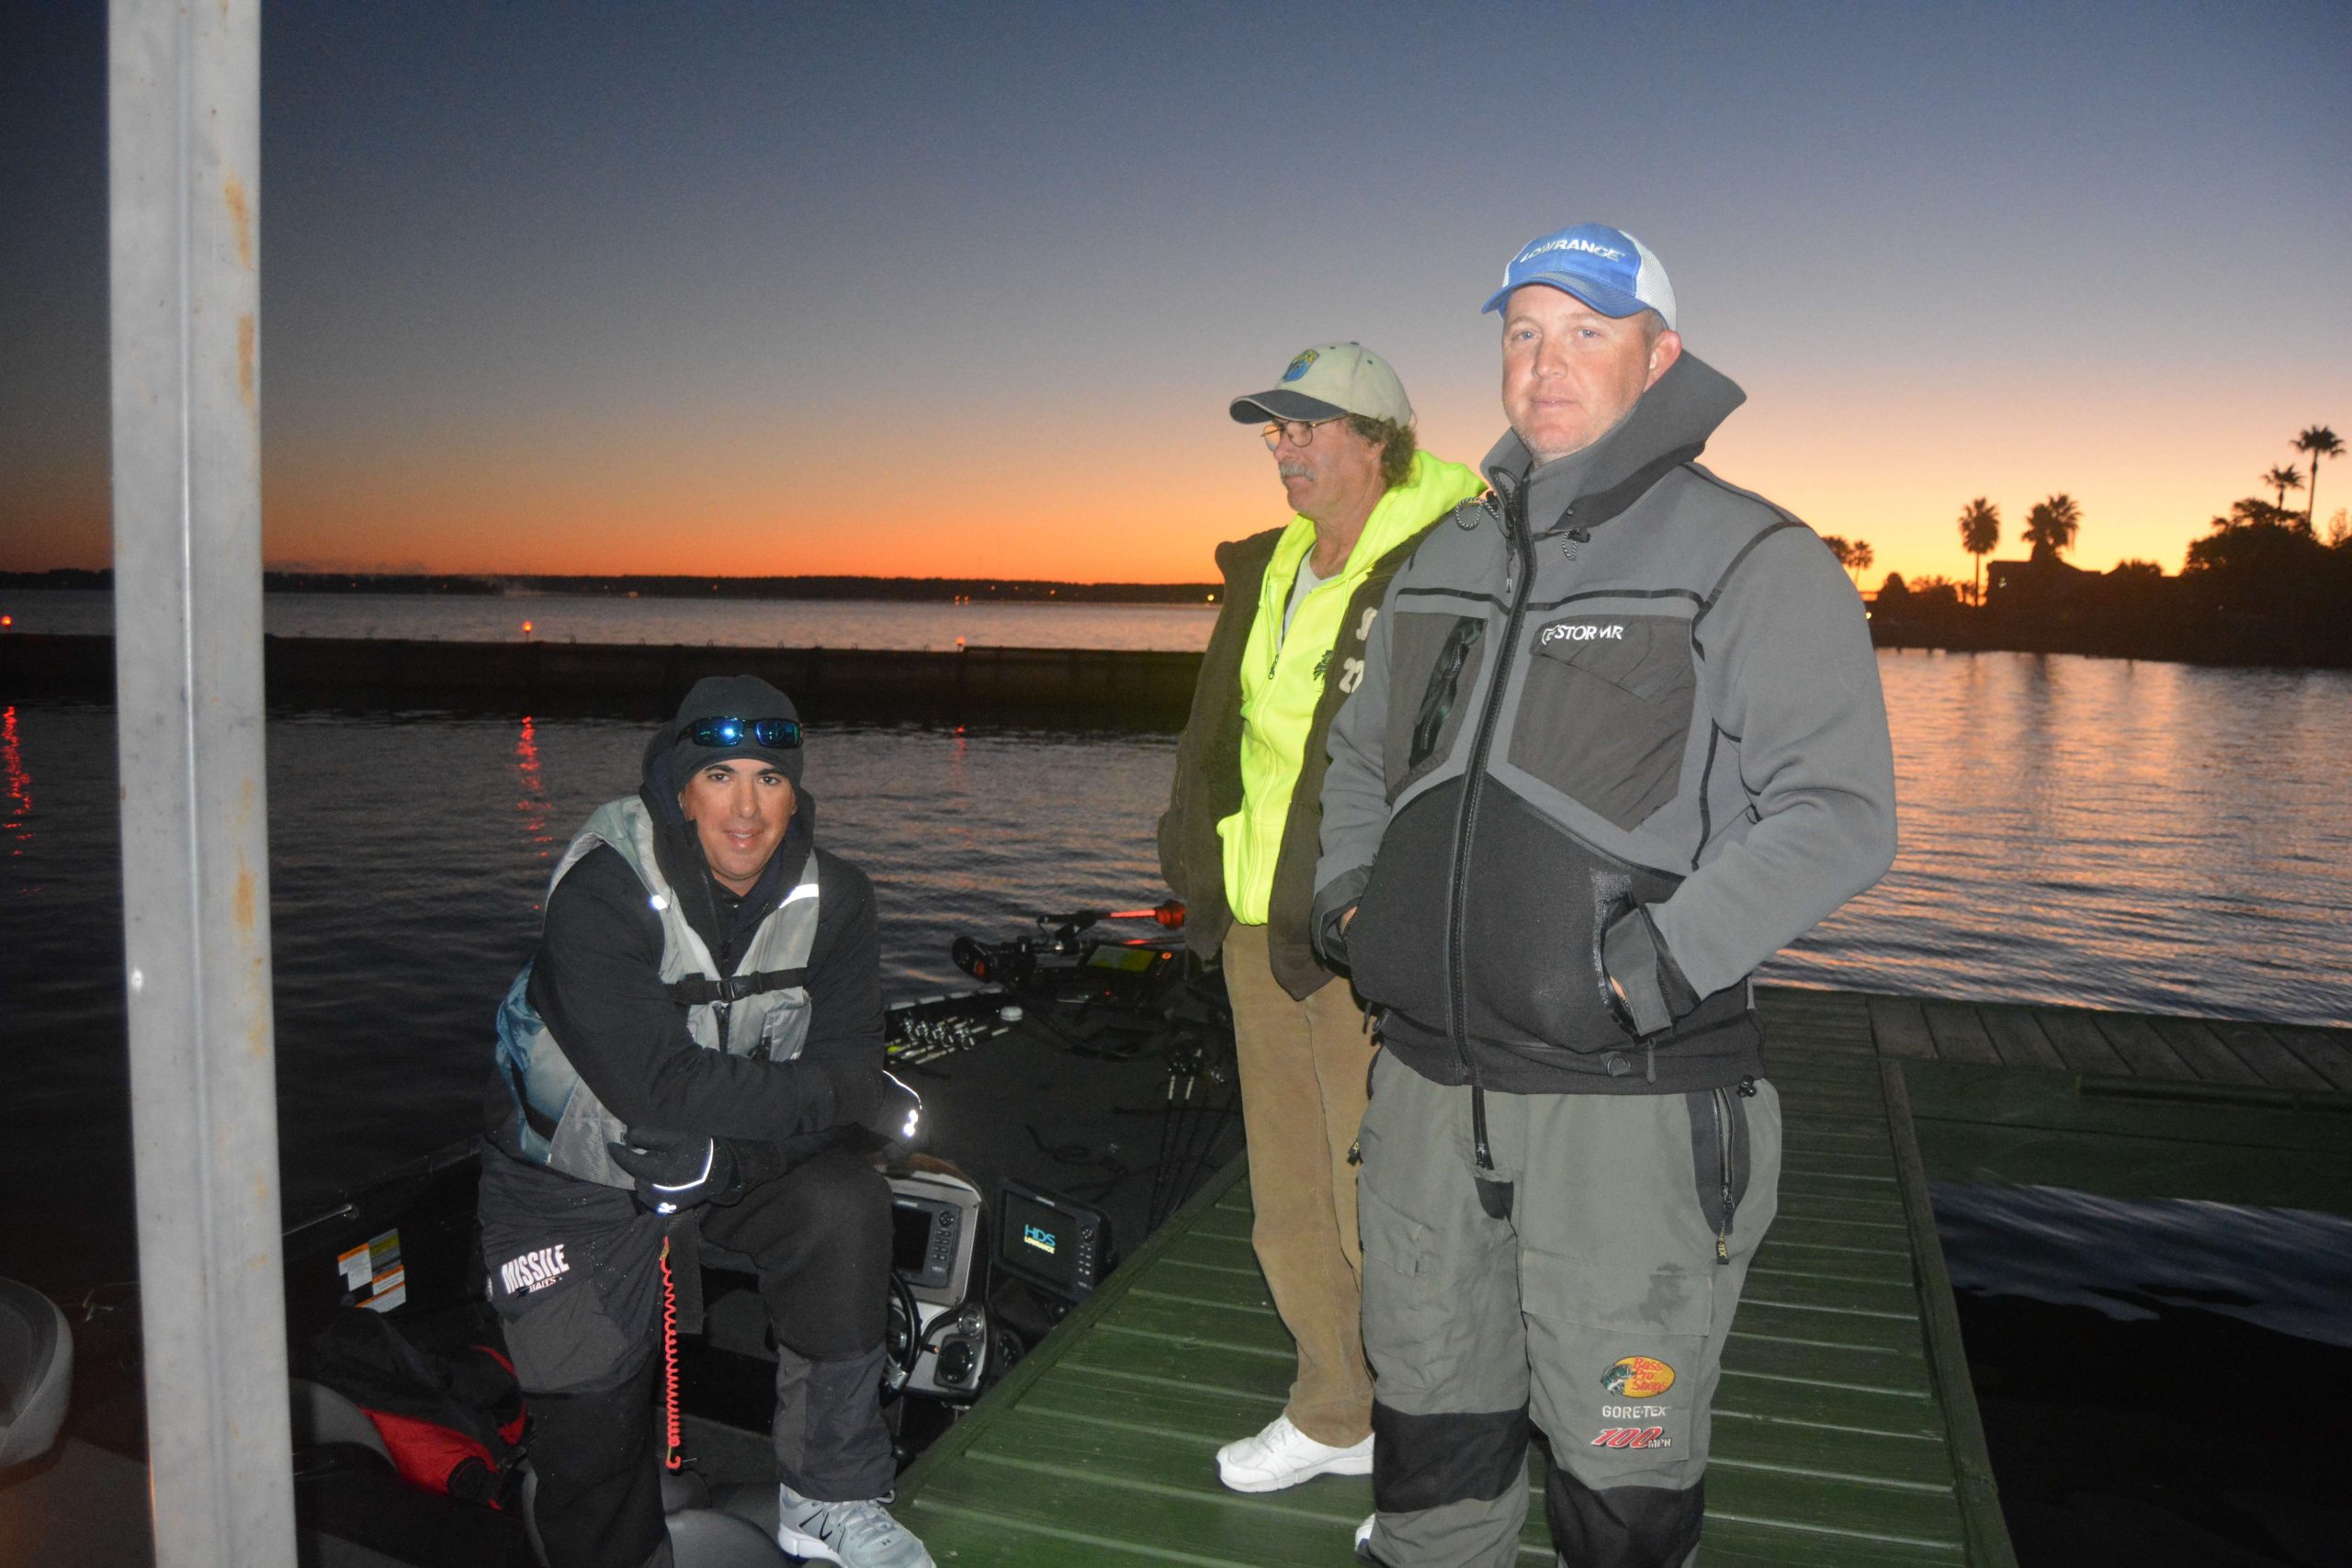 Ryan Lavigne, Rick Hamer and Danny Grantham spend some time hanging out and having a laugh before takeoff. Hamer was the top nonboater on Day 1, but he's now out of the competition. However, Lavigne and Grantham are going for the big prize today.